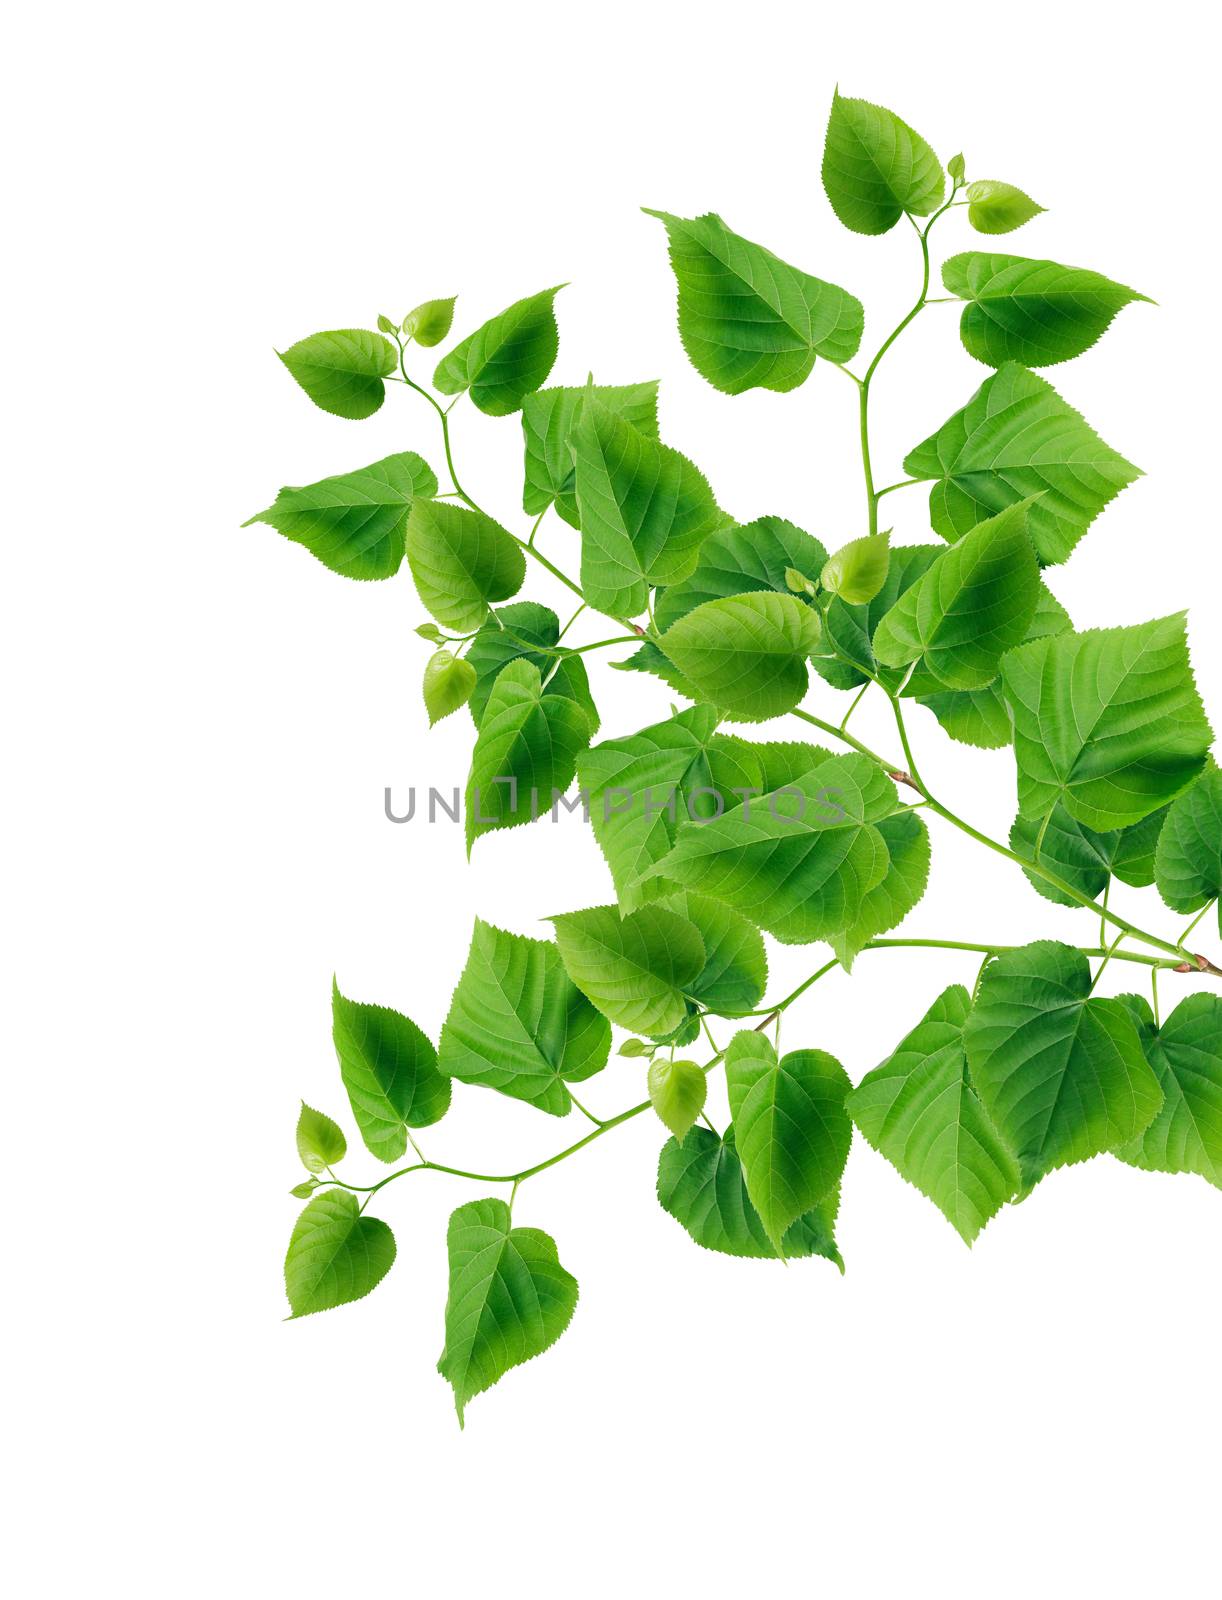 Nice green ivy in bloom on white background